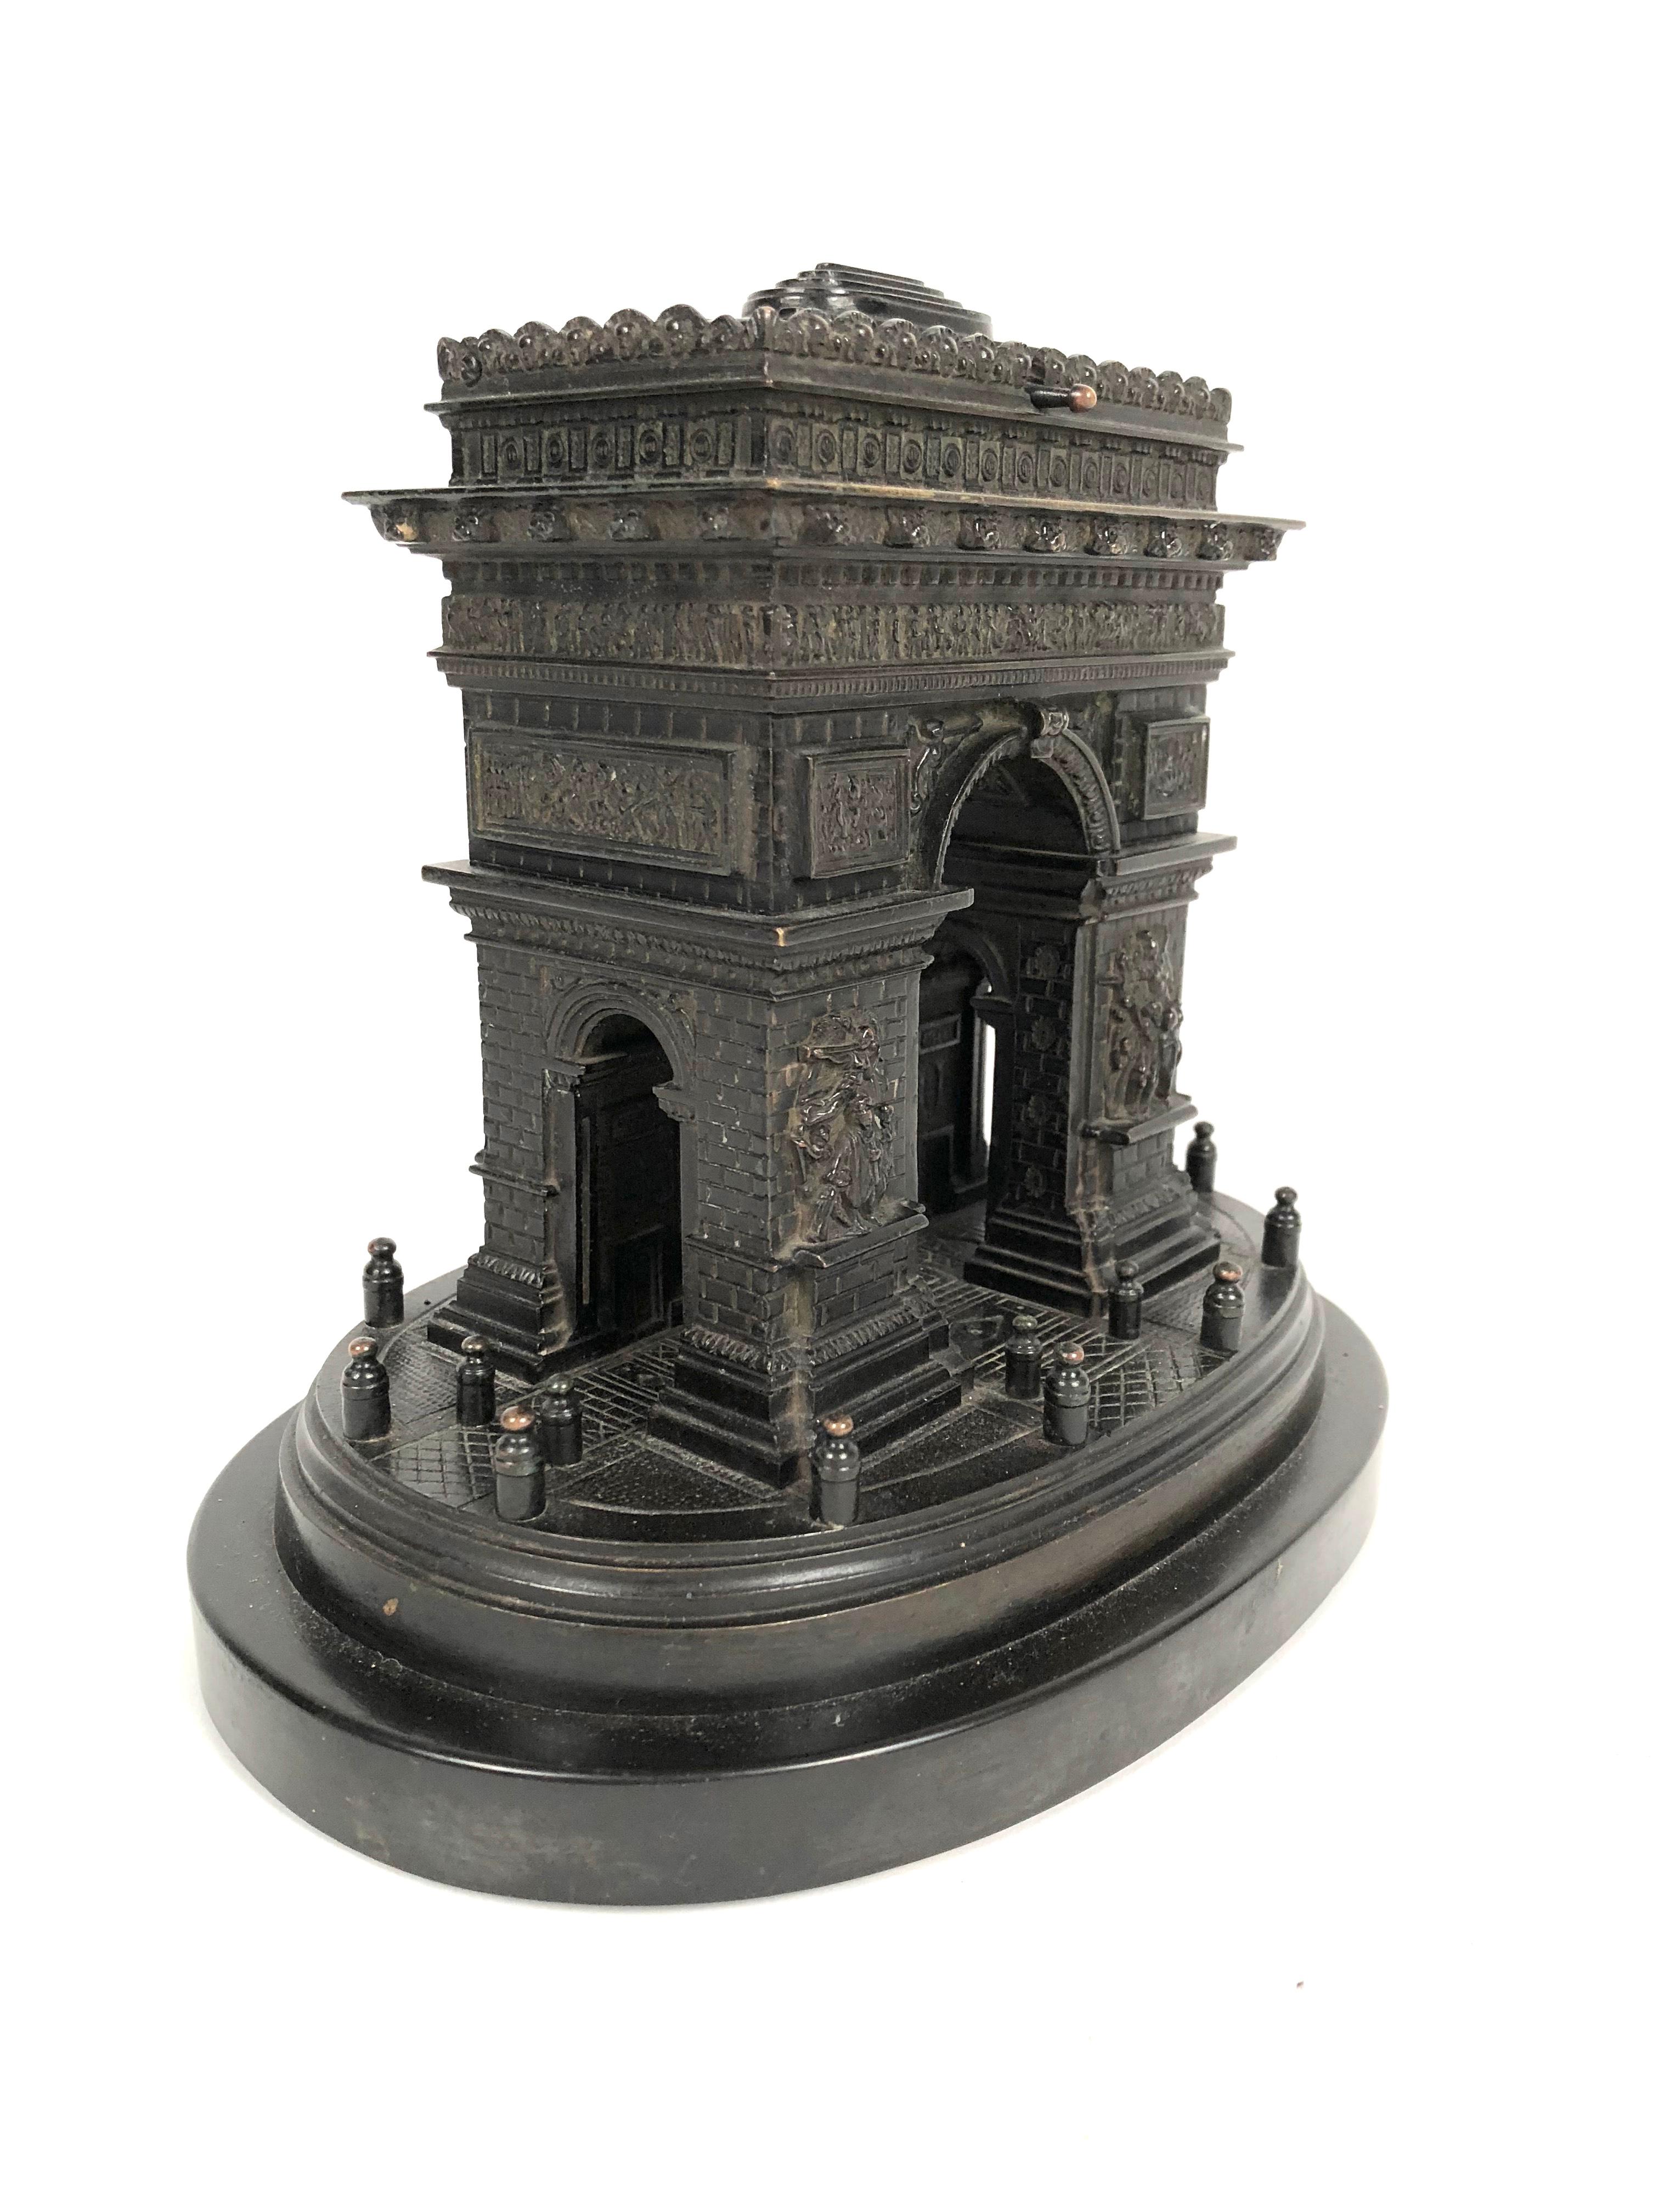 A generously sized and well detailed Grand Tour bronze architectural model of the Arc de Triomphe in Paris, mounted on a black marble base. Created as a high end souvenir in the late 19th century for travelers to Paris, this model is very well